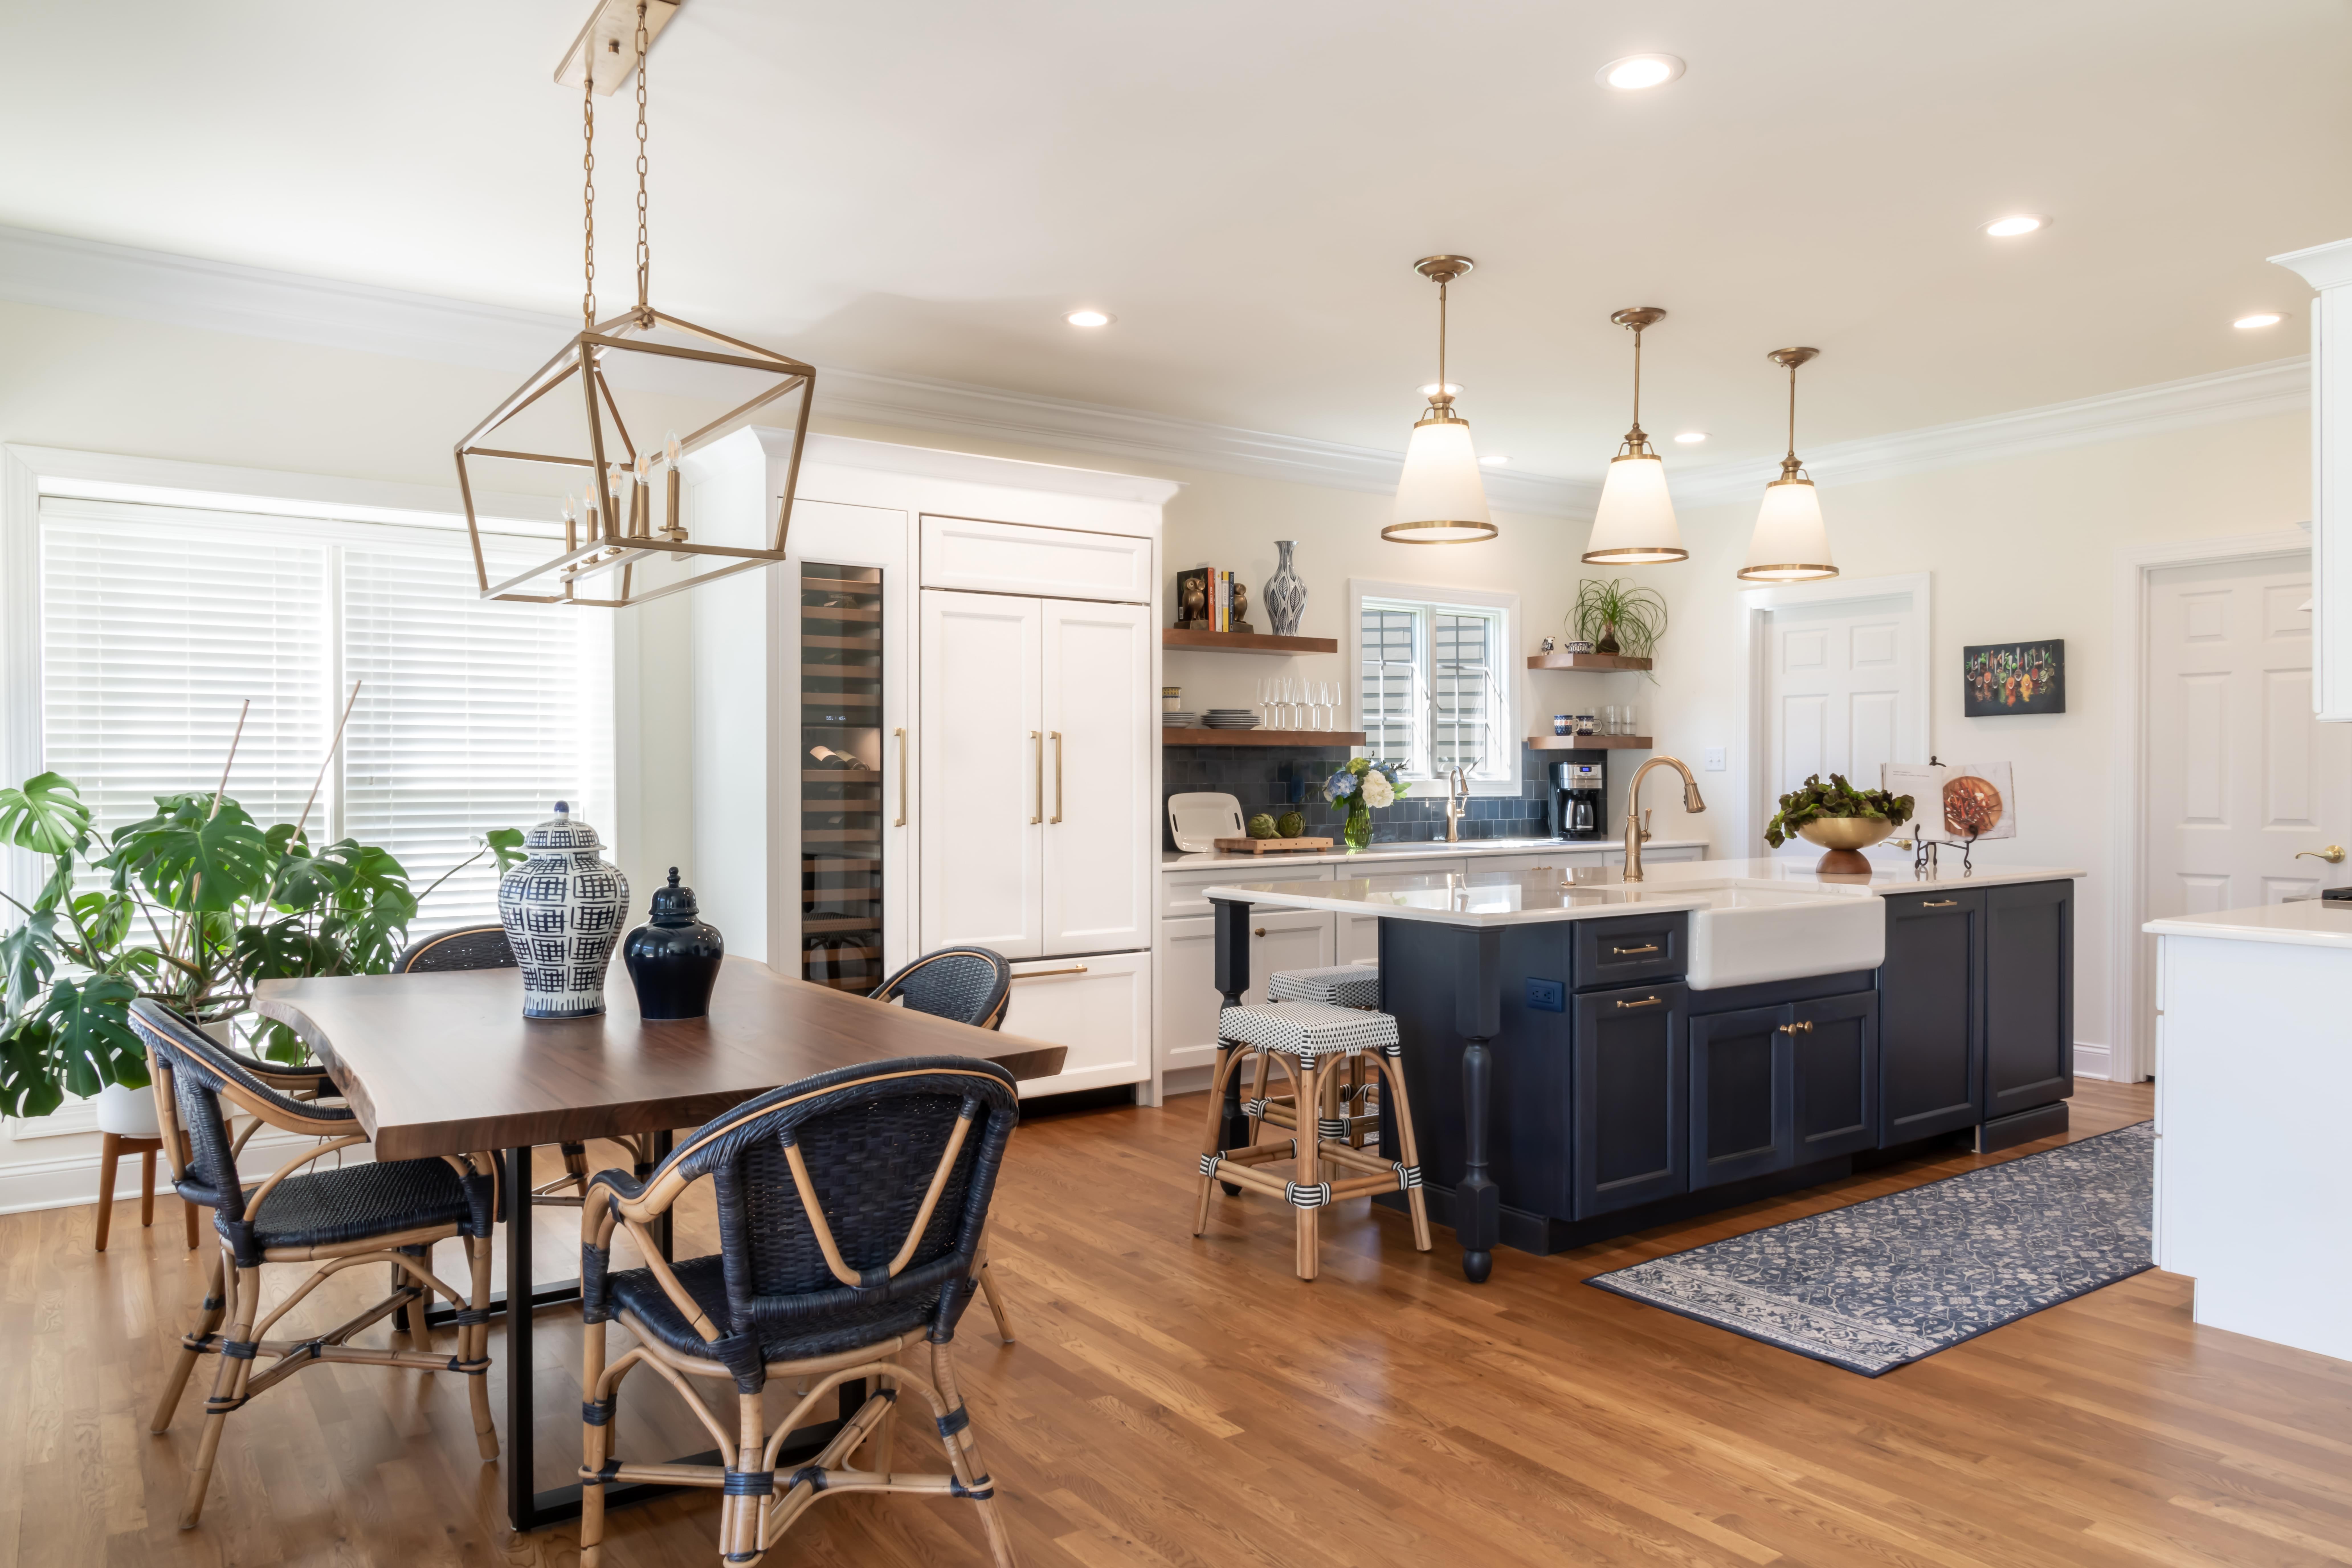 image of open concept kitchen and dining room